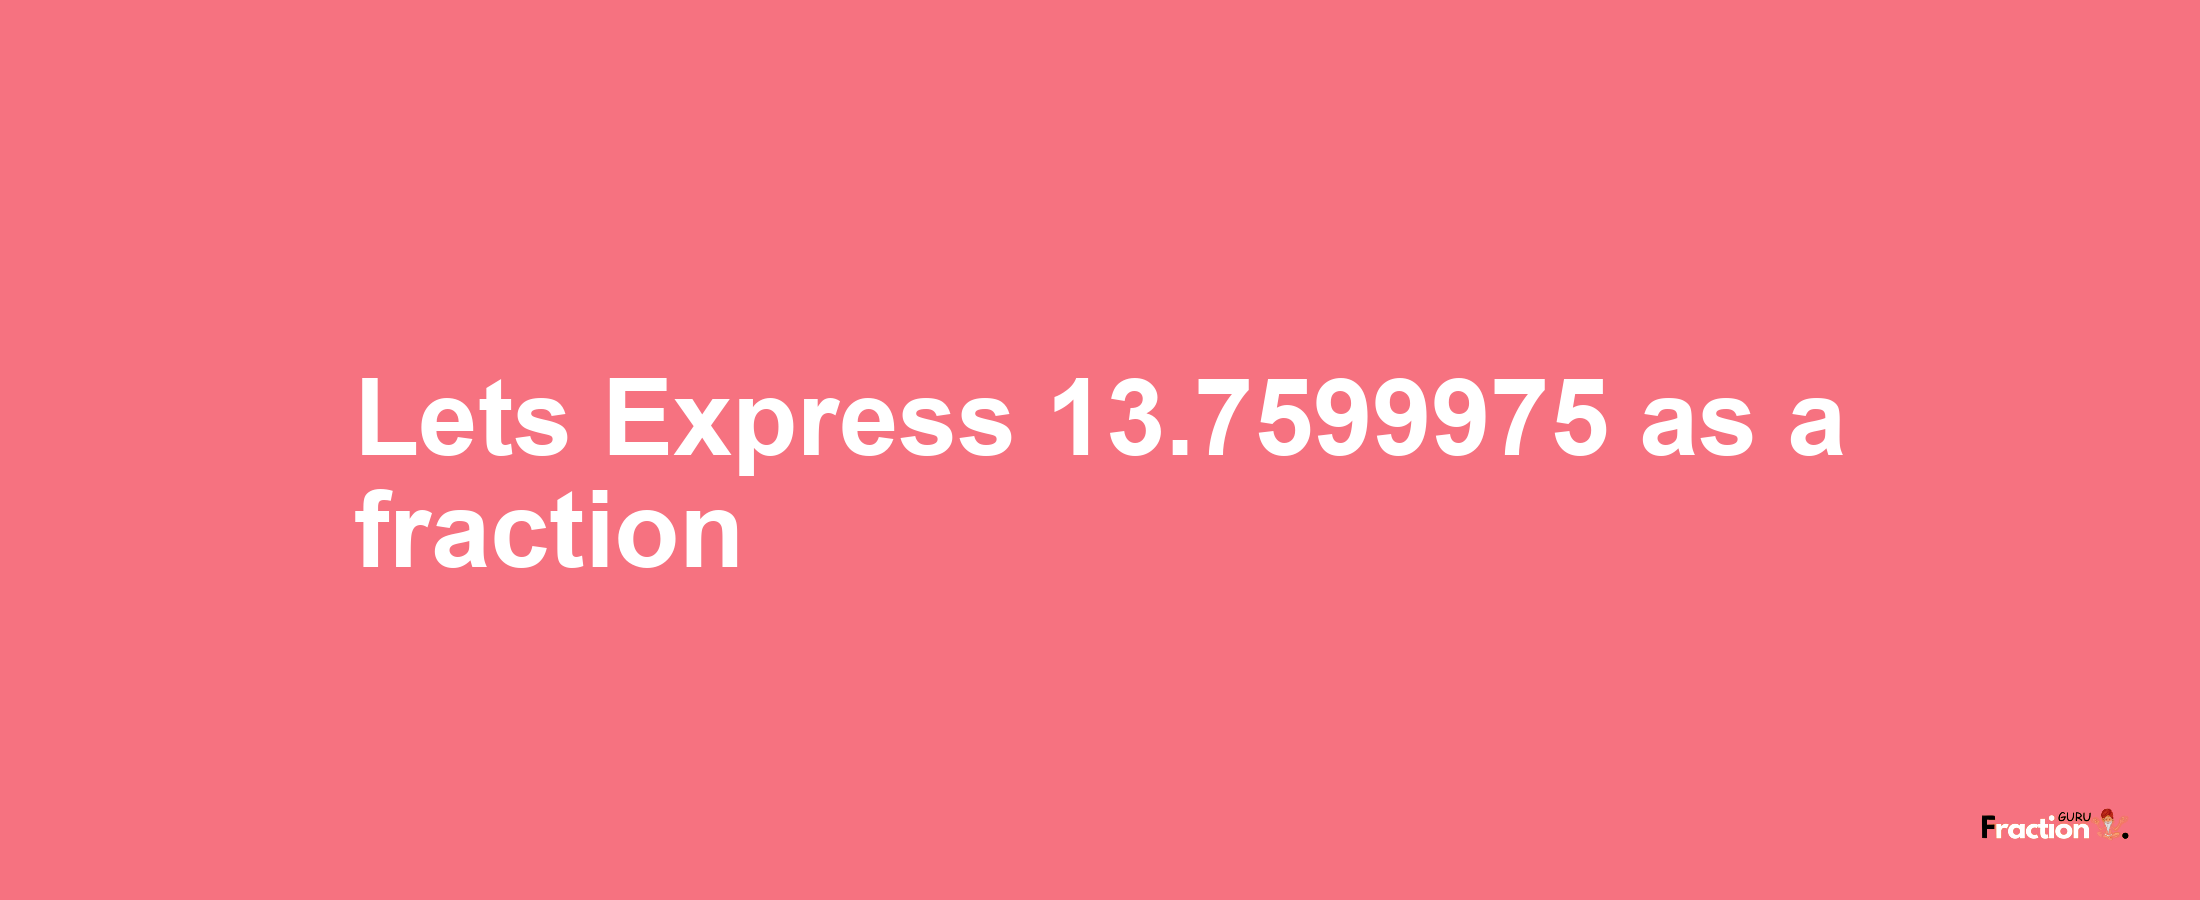 Lets Express 13.7599975 as afraction